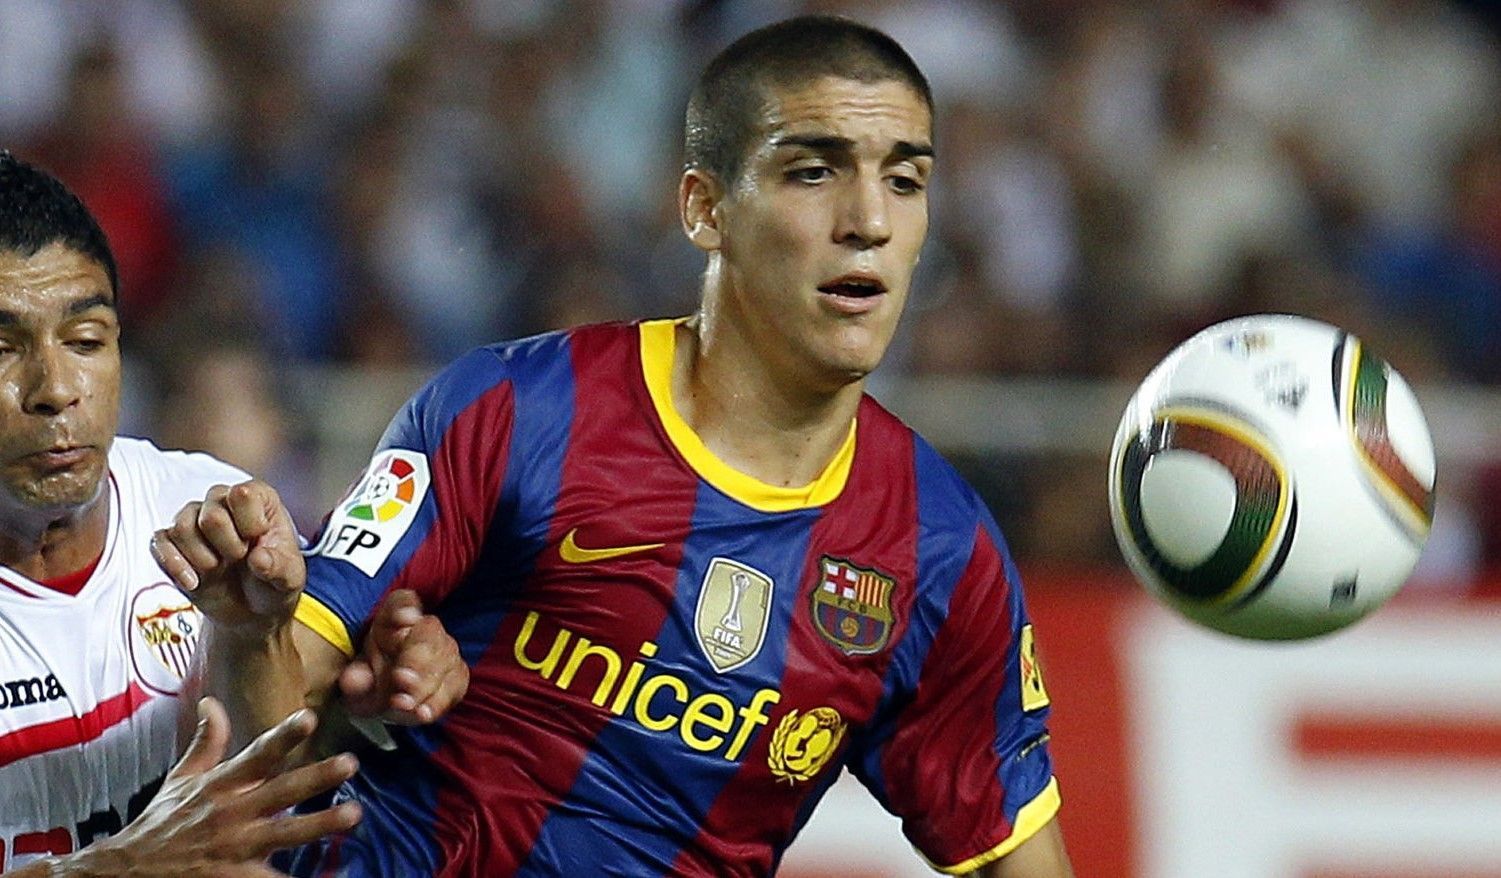 Oriol Romeu struggled to get game time with the Blaugrana